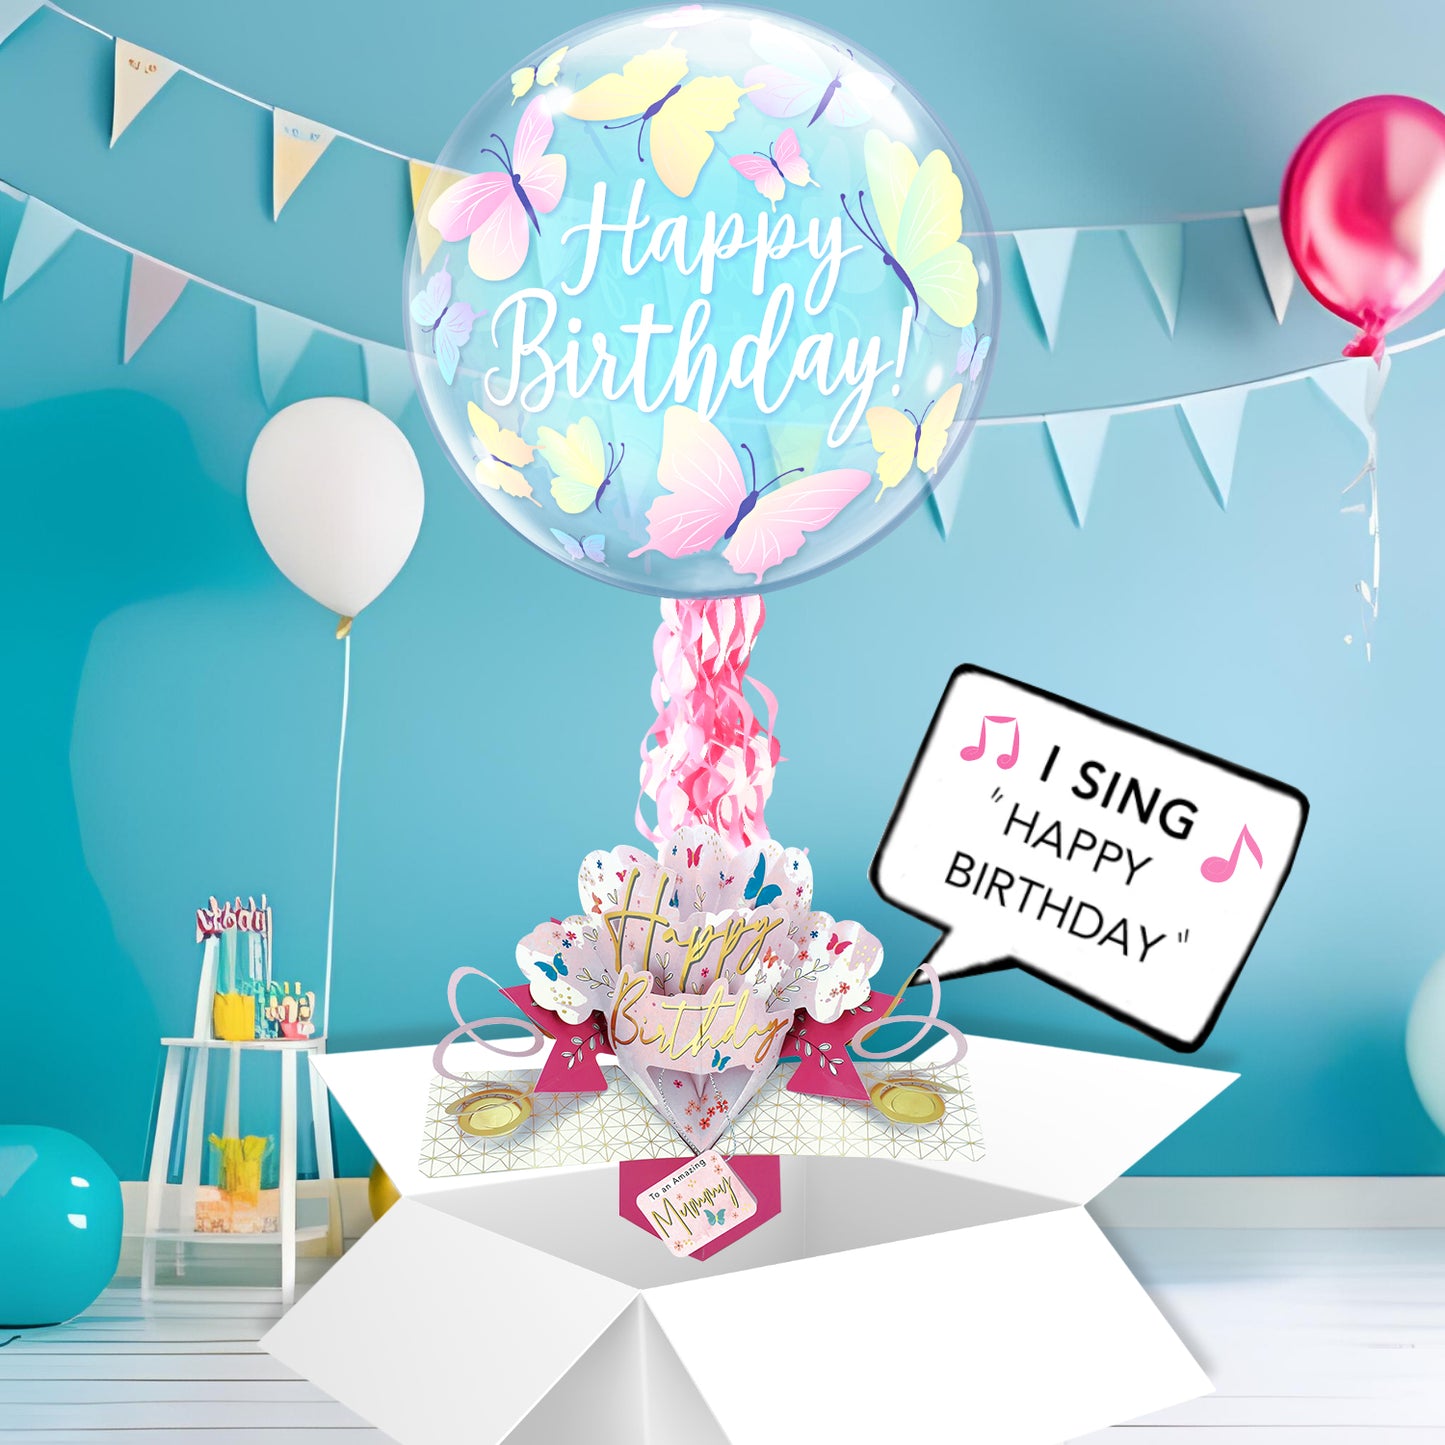 Mummy Birthday Pop Up Card & Musical Balloon Surprise Delivered In A Box